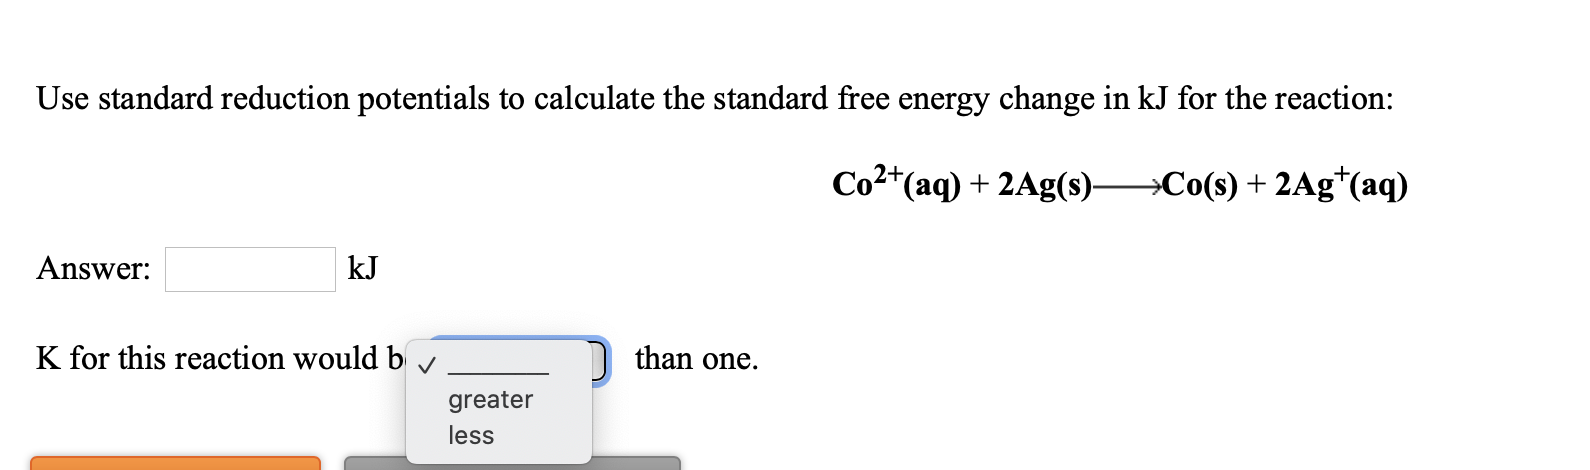 Use standard reduction potentials to calculate the standard free energy change in kJ for the reaction:
Co²*(aq) + 2Ag(s)-
→Co(s) + 2Ag*(aq)
Answer:
kJ
K for this reaction would b
than one.
greater
less
